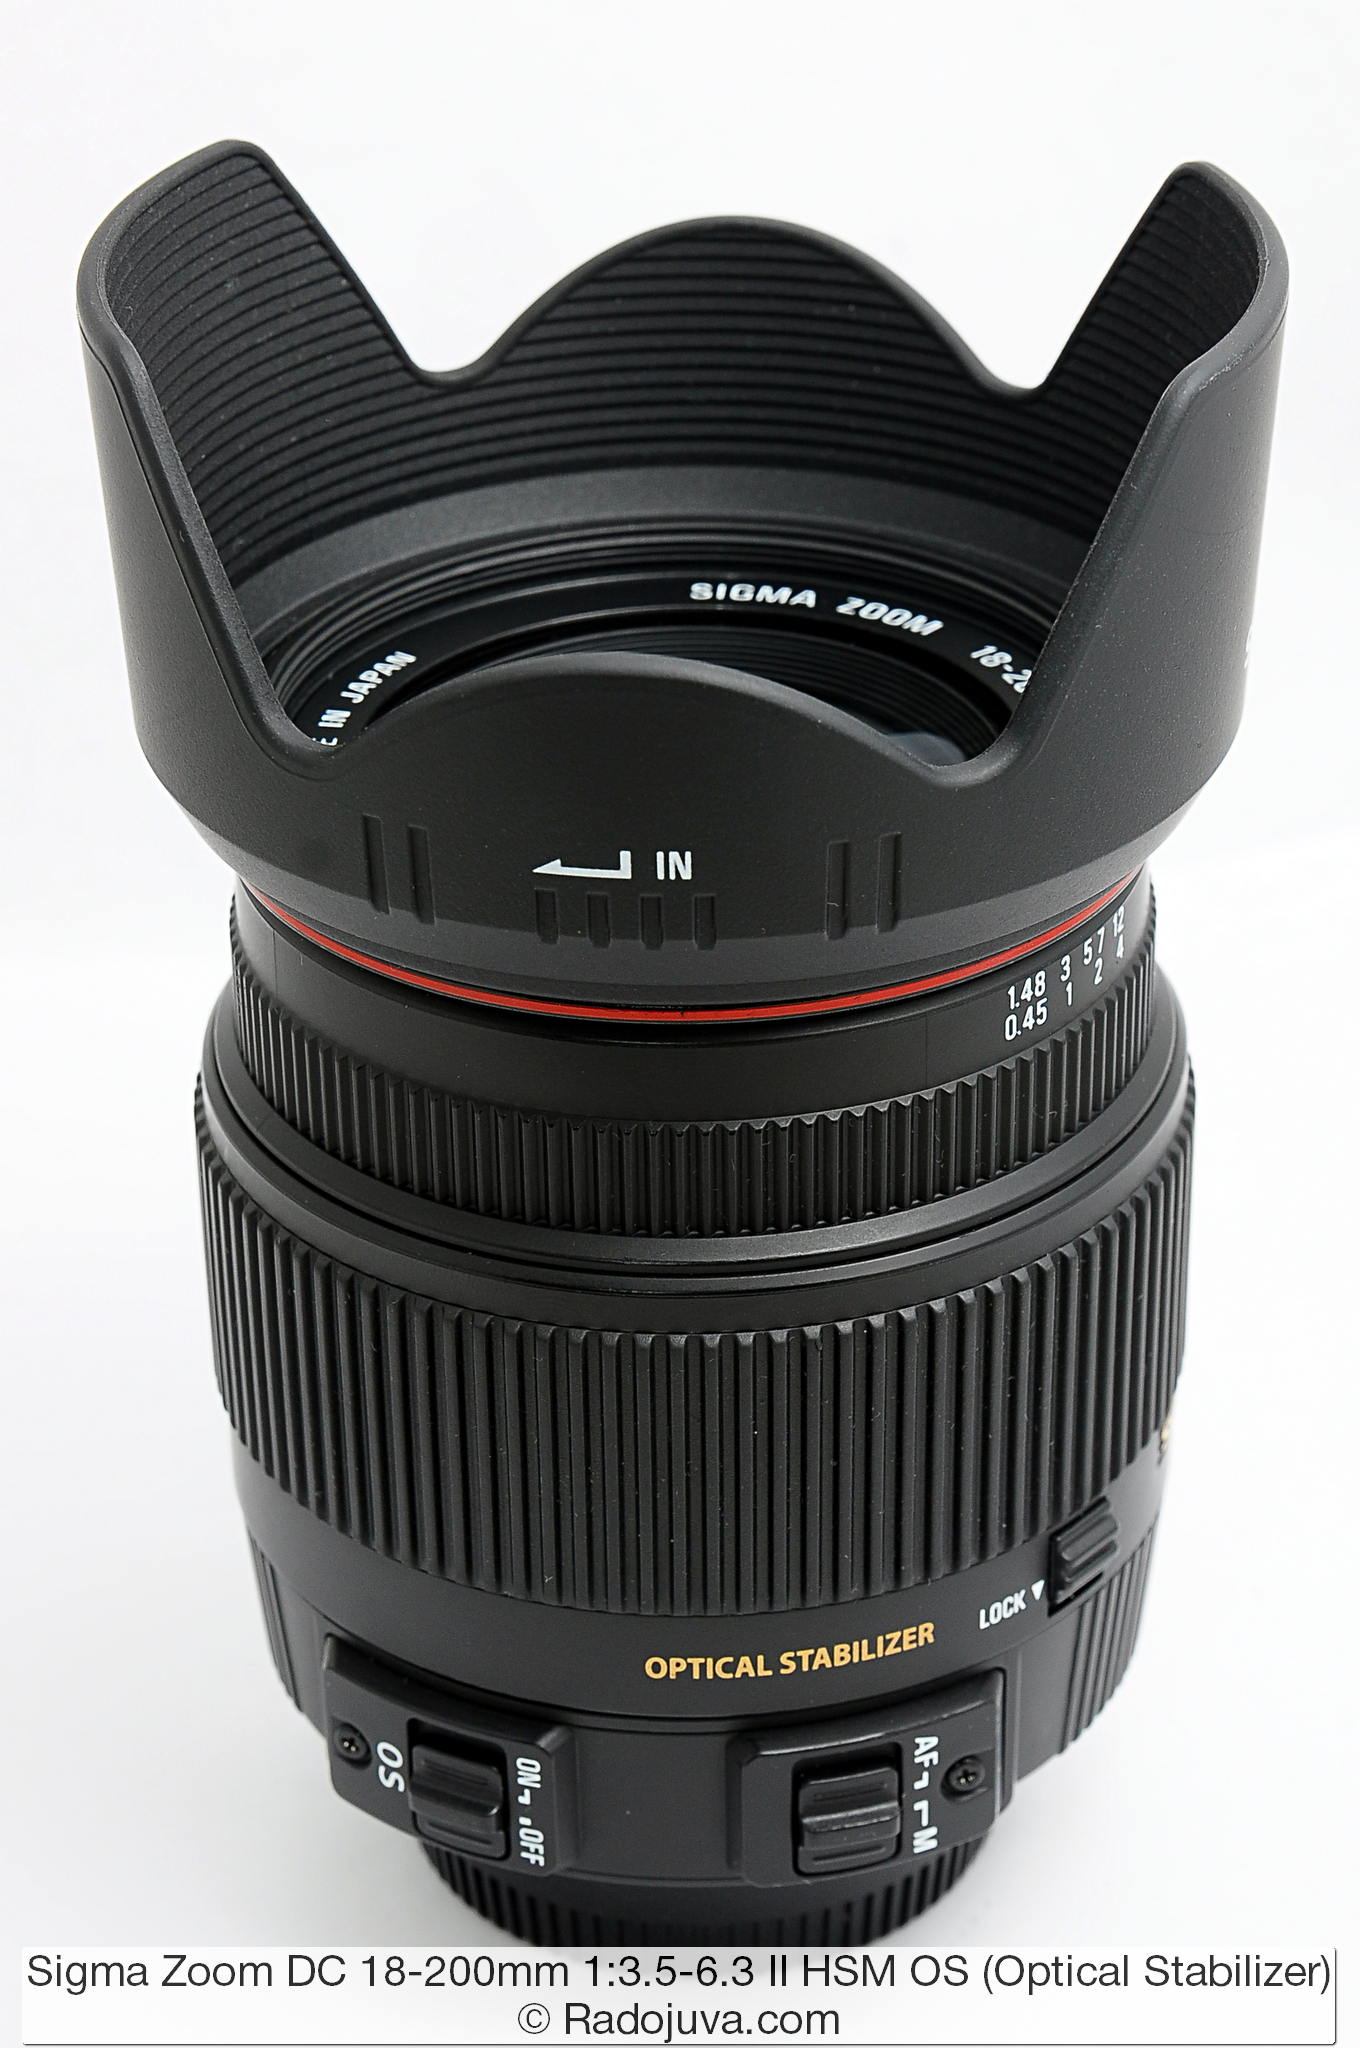 Review Sigma Zoom DC 18-200mm 1: 3.5-6.3 II HSM OS | Happy